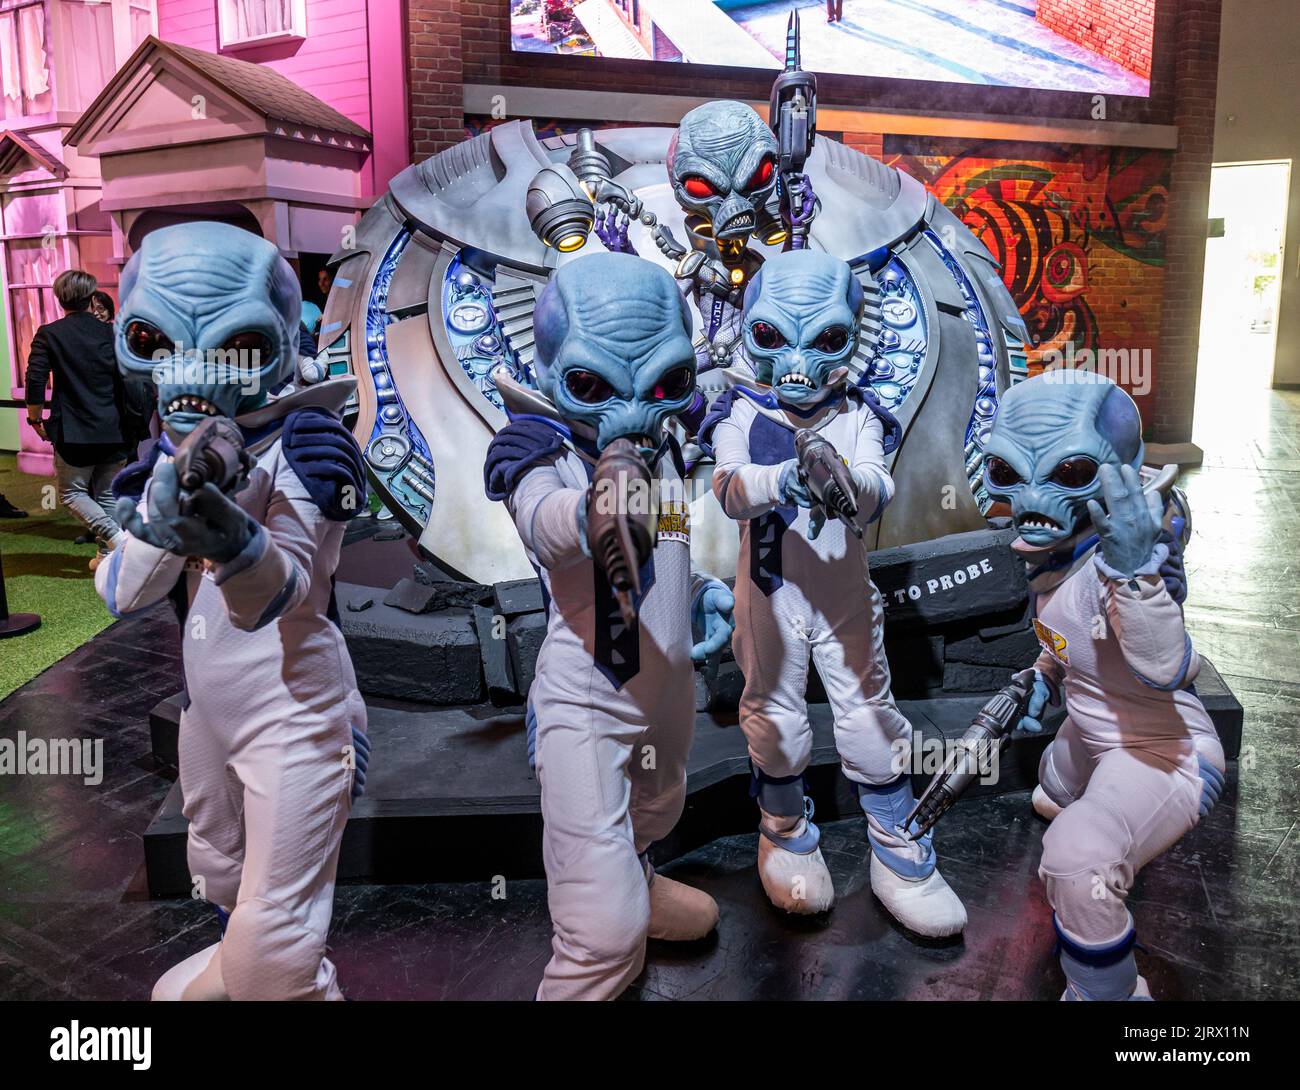 Cologne, Germany. 24th Aug, 2022. Gamescom 2022: Actors in alien costumes promote the remake of the action-adventure video game Destroy all Humans! 2 - Reprobed, remake developed by Black Forest Games, published by THQ Nordic. Gamescom is the world's largest trade fair for computer and video games, at Koelnmesse in Cologne, Germany. Photocredit: Christian Lademann / lademann.media Stock Photo